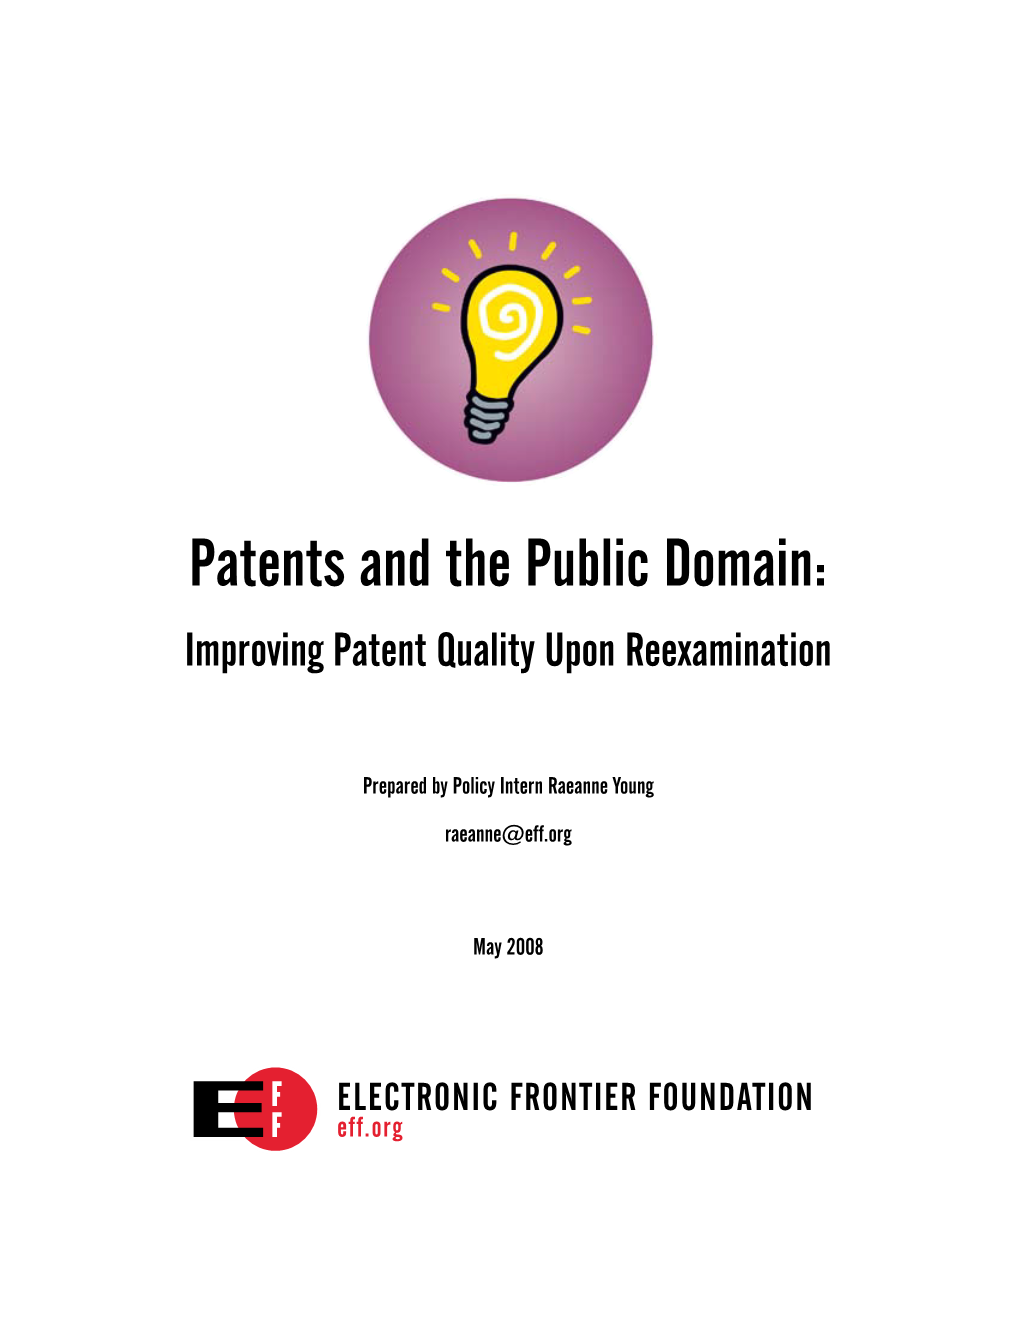 Patents and the Public Domain: Improving Patent Quality Upon Reexamination